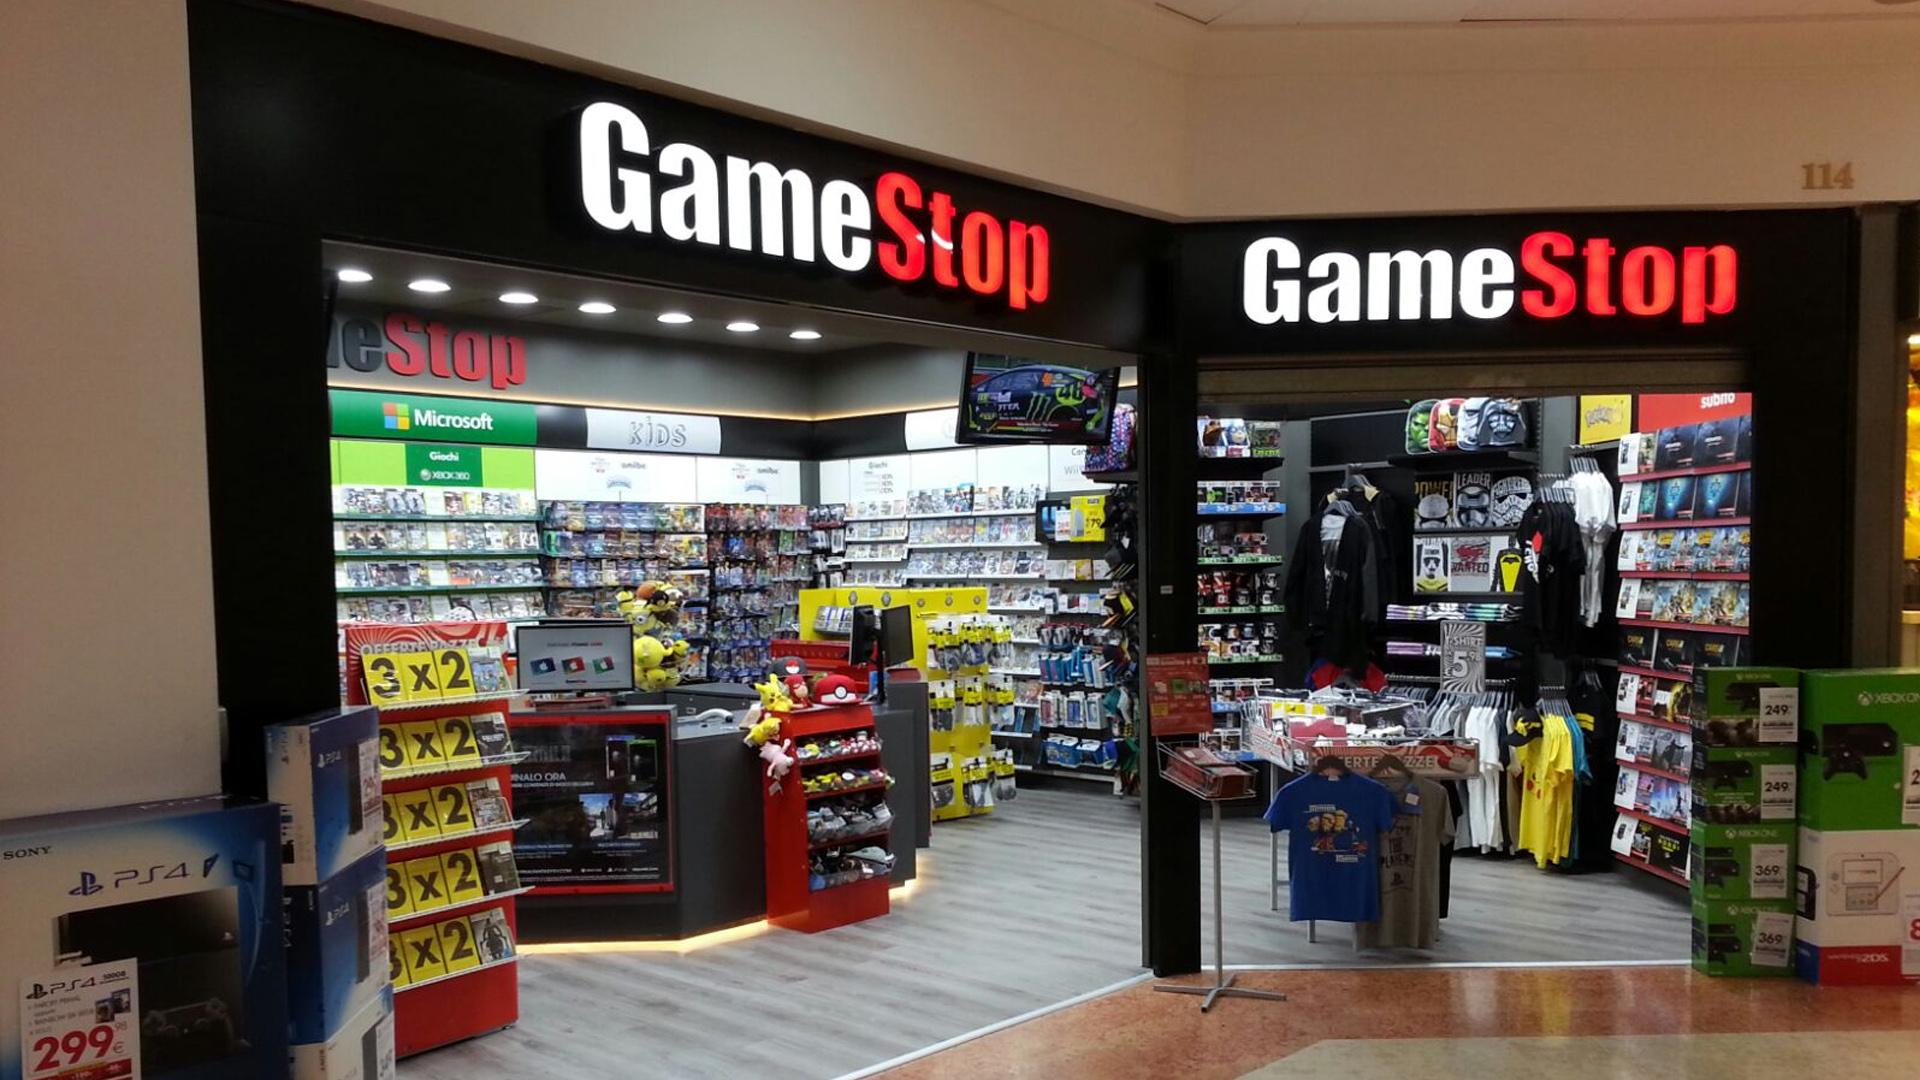 GameStop It's Hard To Disagree With The Market GameStop Corp. (NYSE